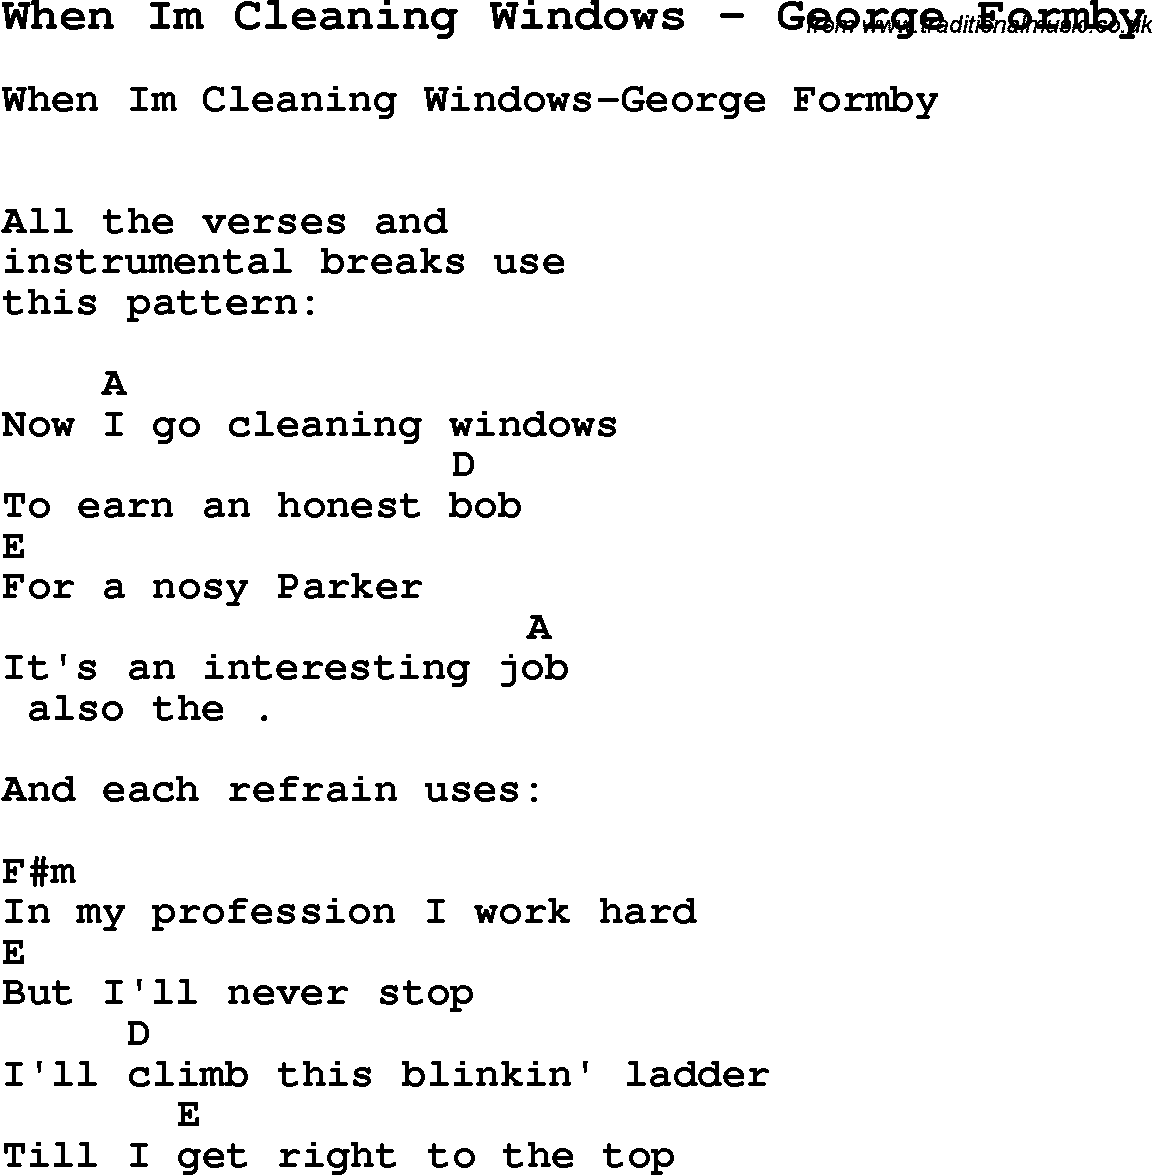 Song When Im Cleaning Windows by George Formby, with lyrics for vocal performance and accompaniment chords for Ukulele, Guitar Banjo etc.